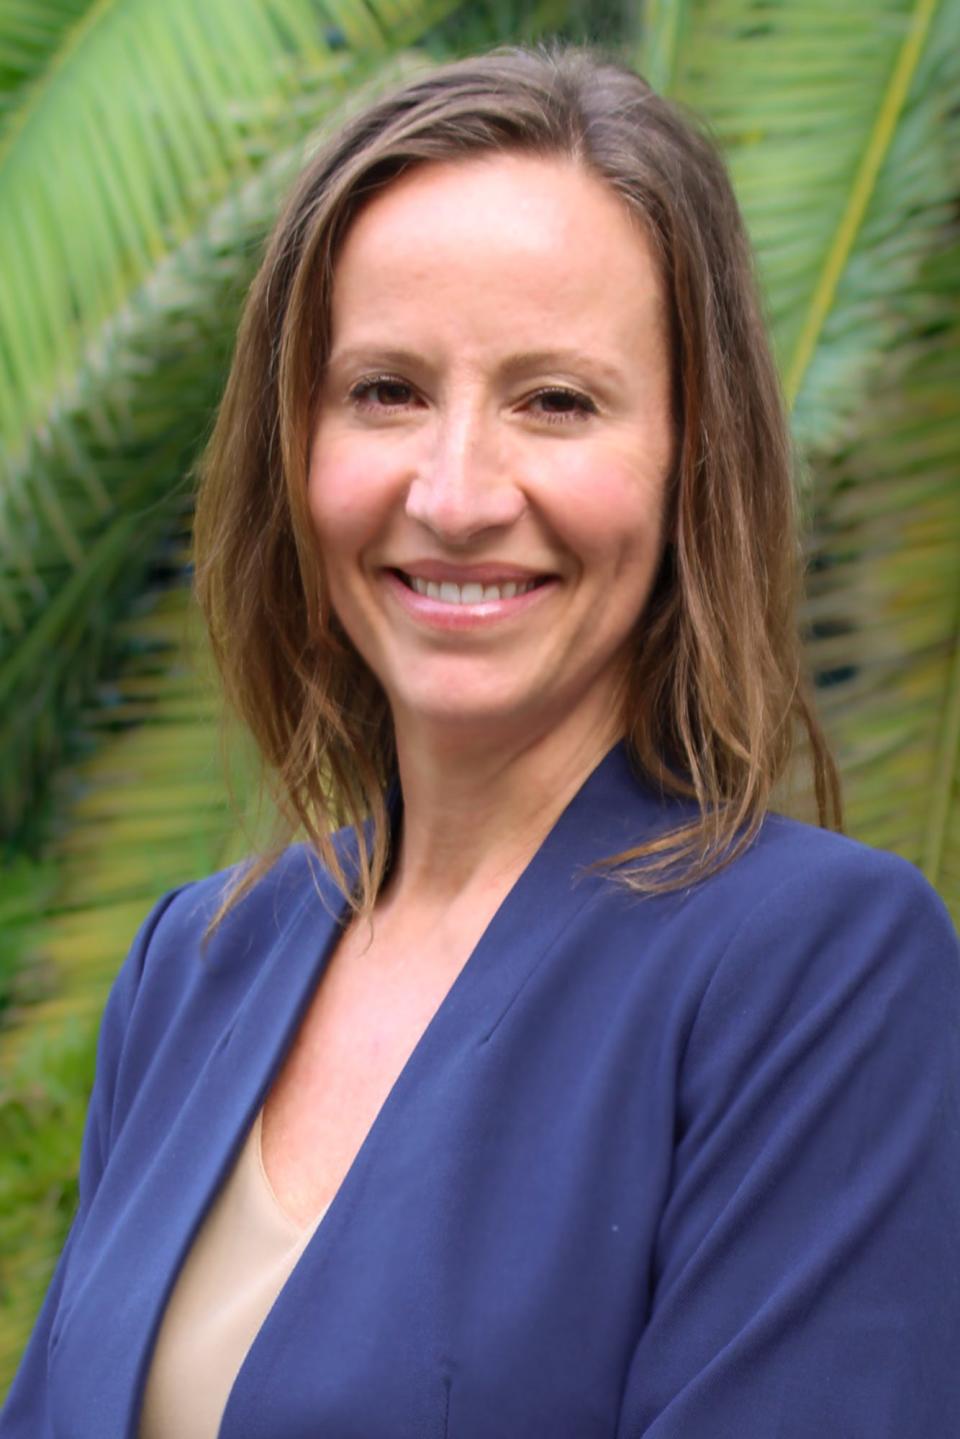 Holly Brody is the new principal at Brentwood Elementary in Sarasota.